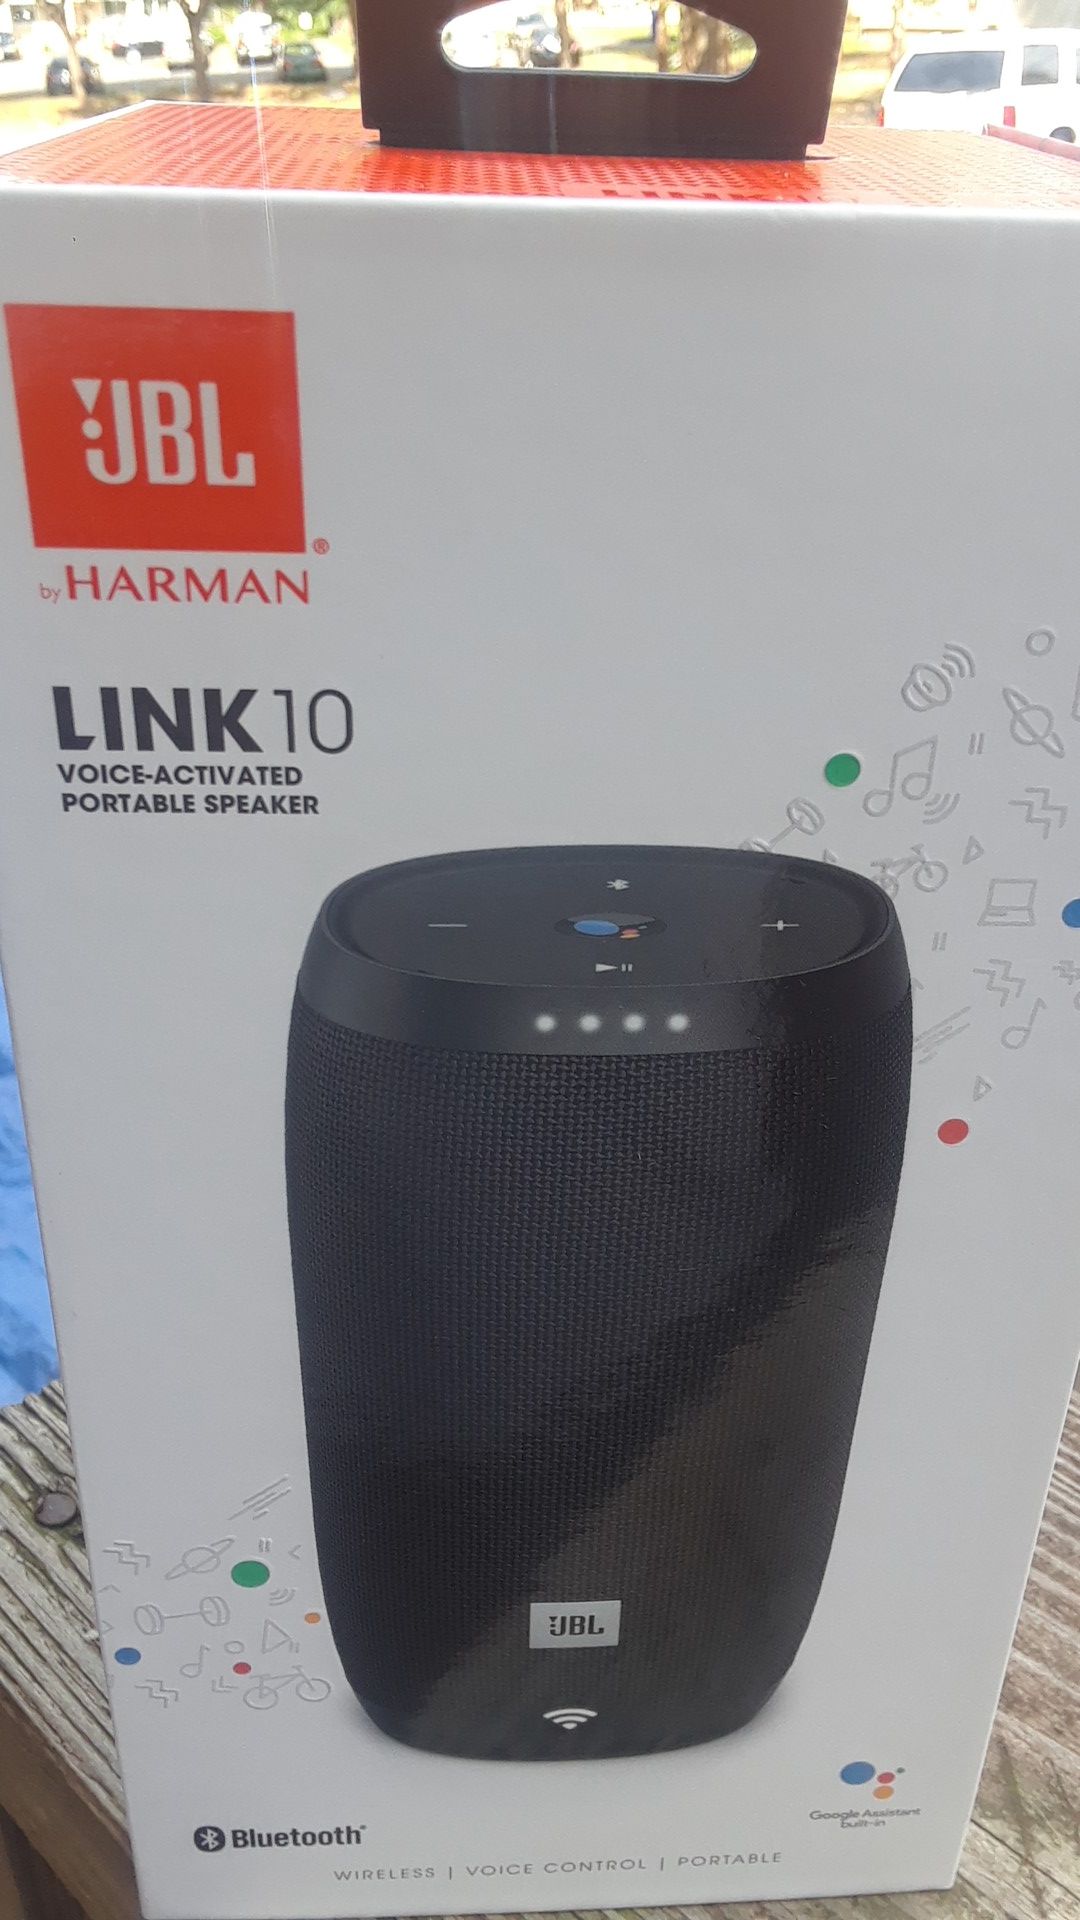 Link 10 voice activated portable speaker.